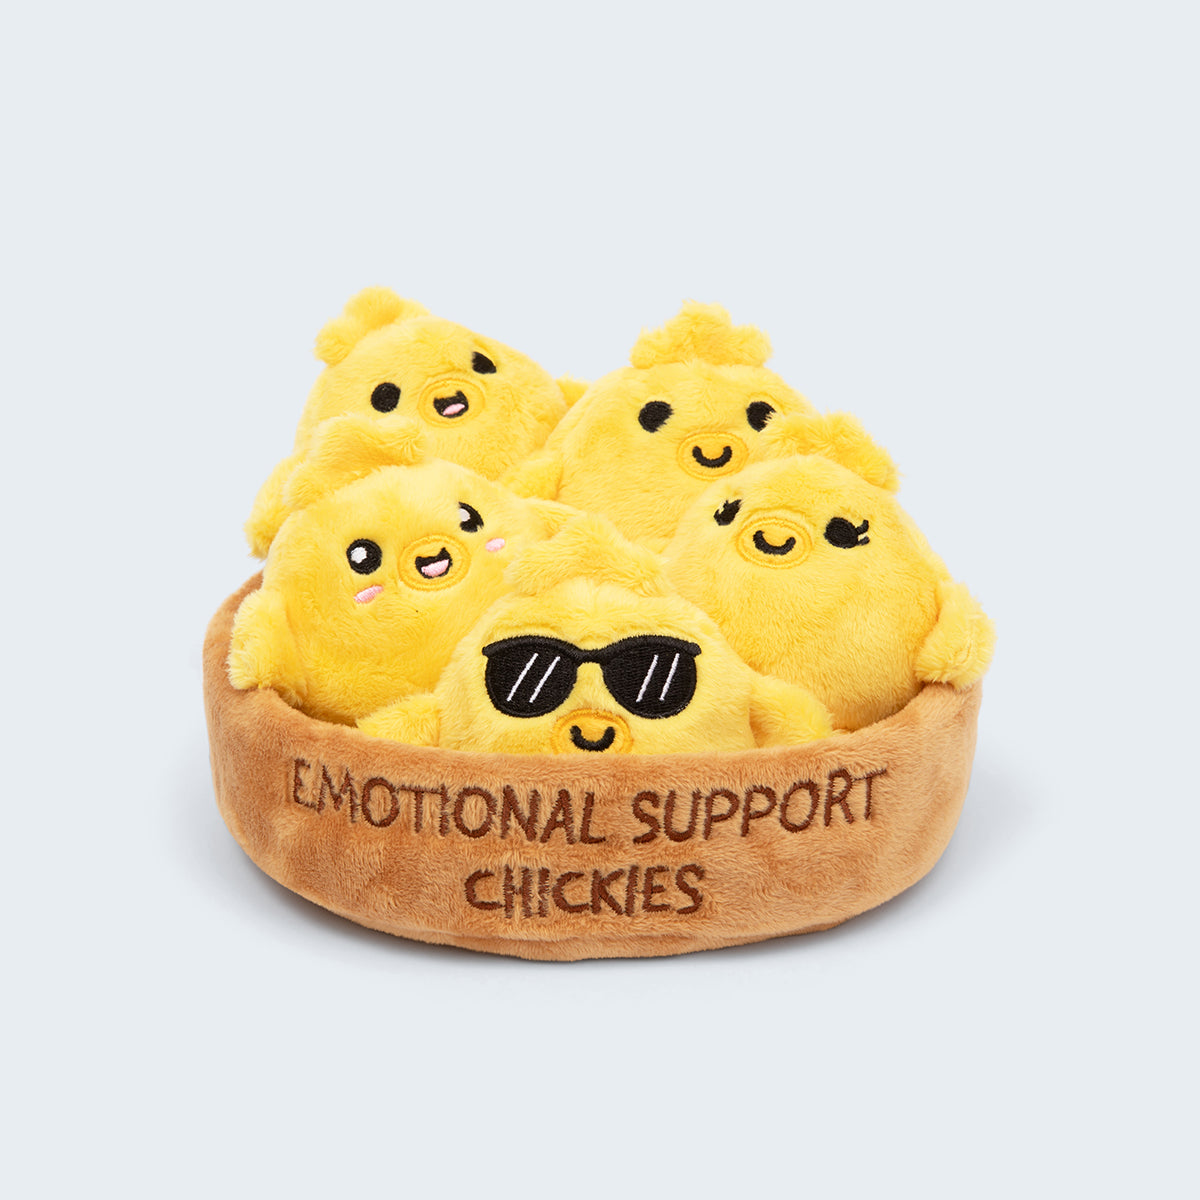 Emotional Support Nuggets by What Do You Meme?